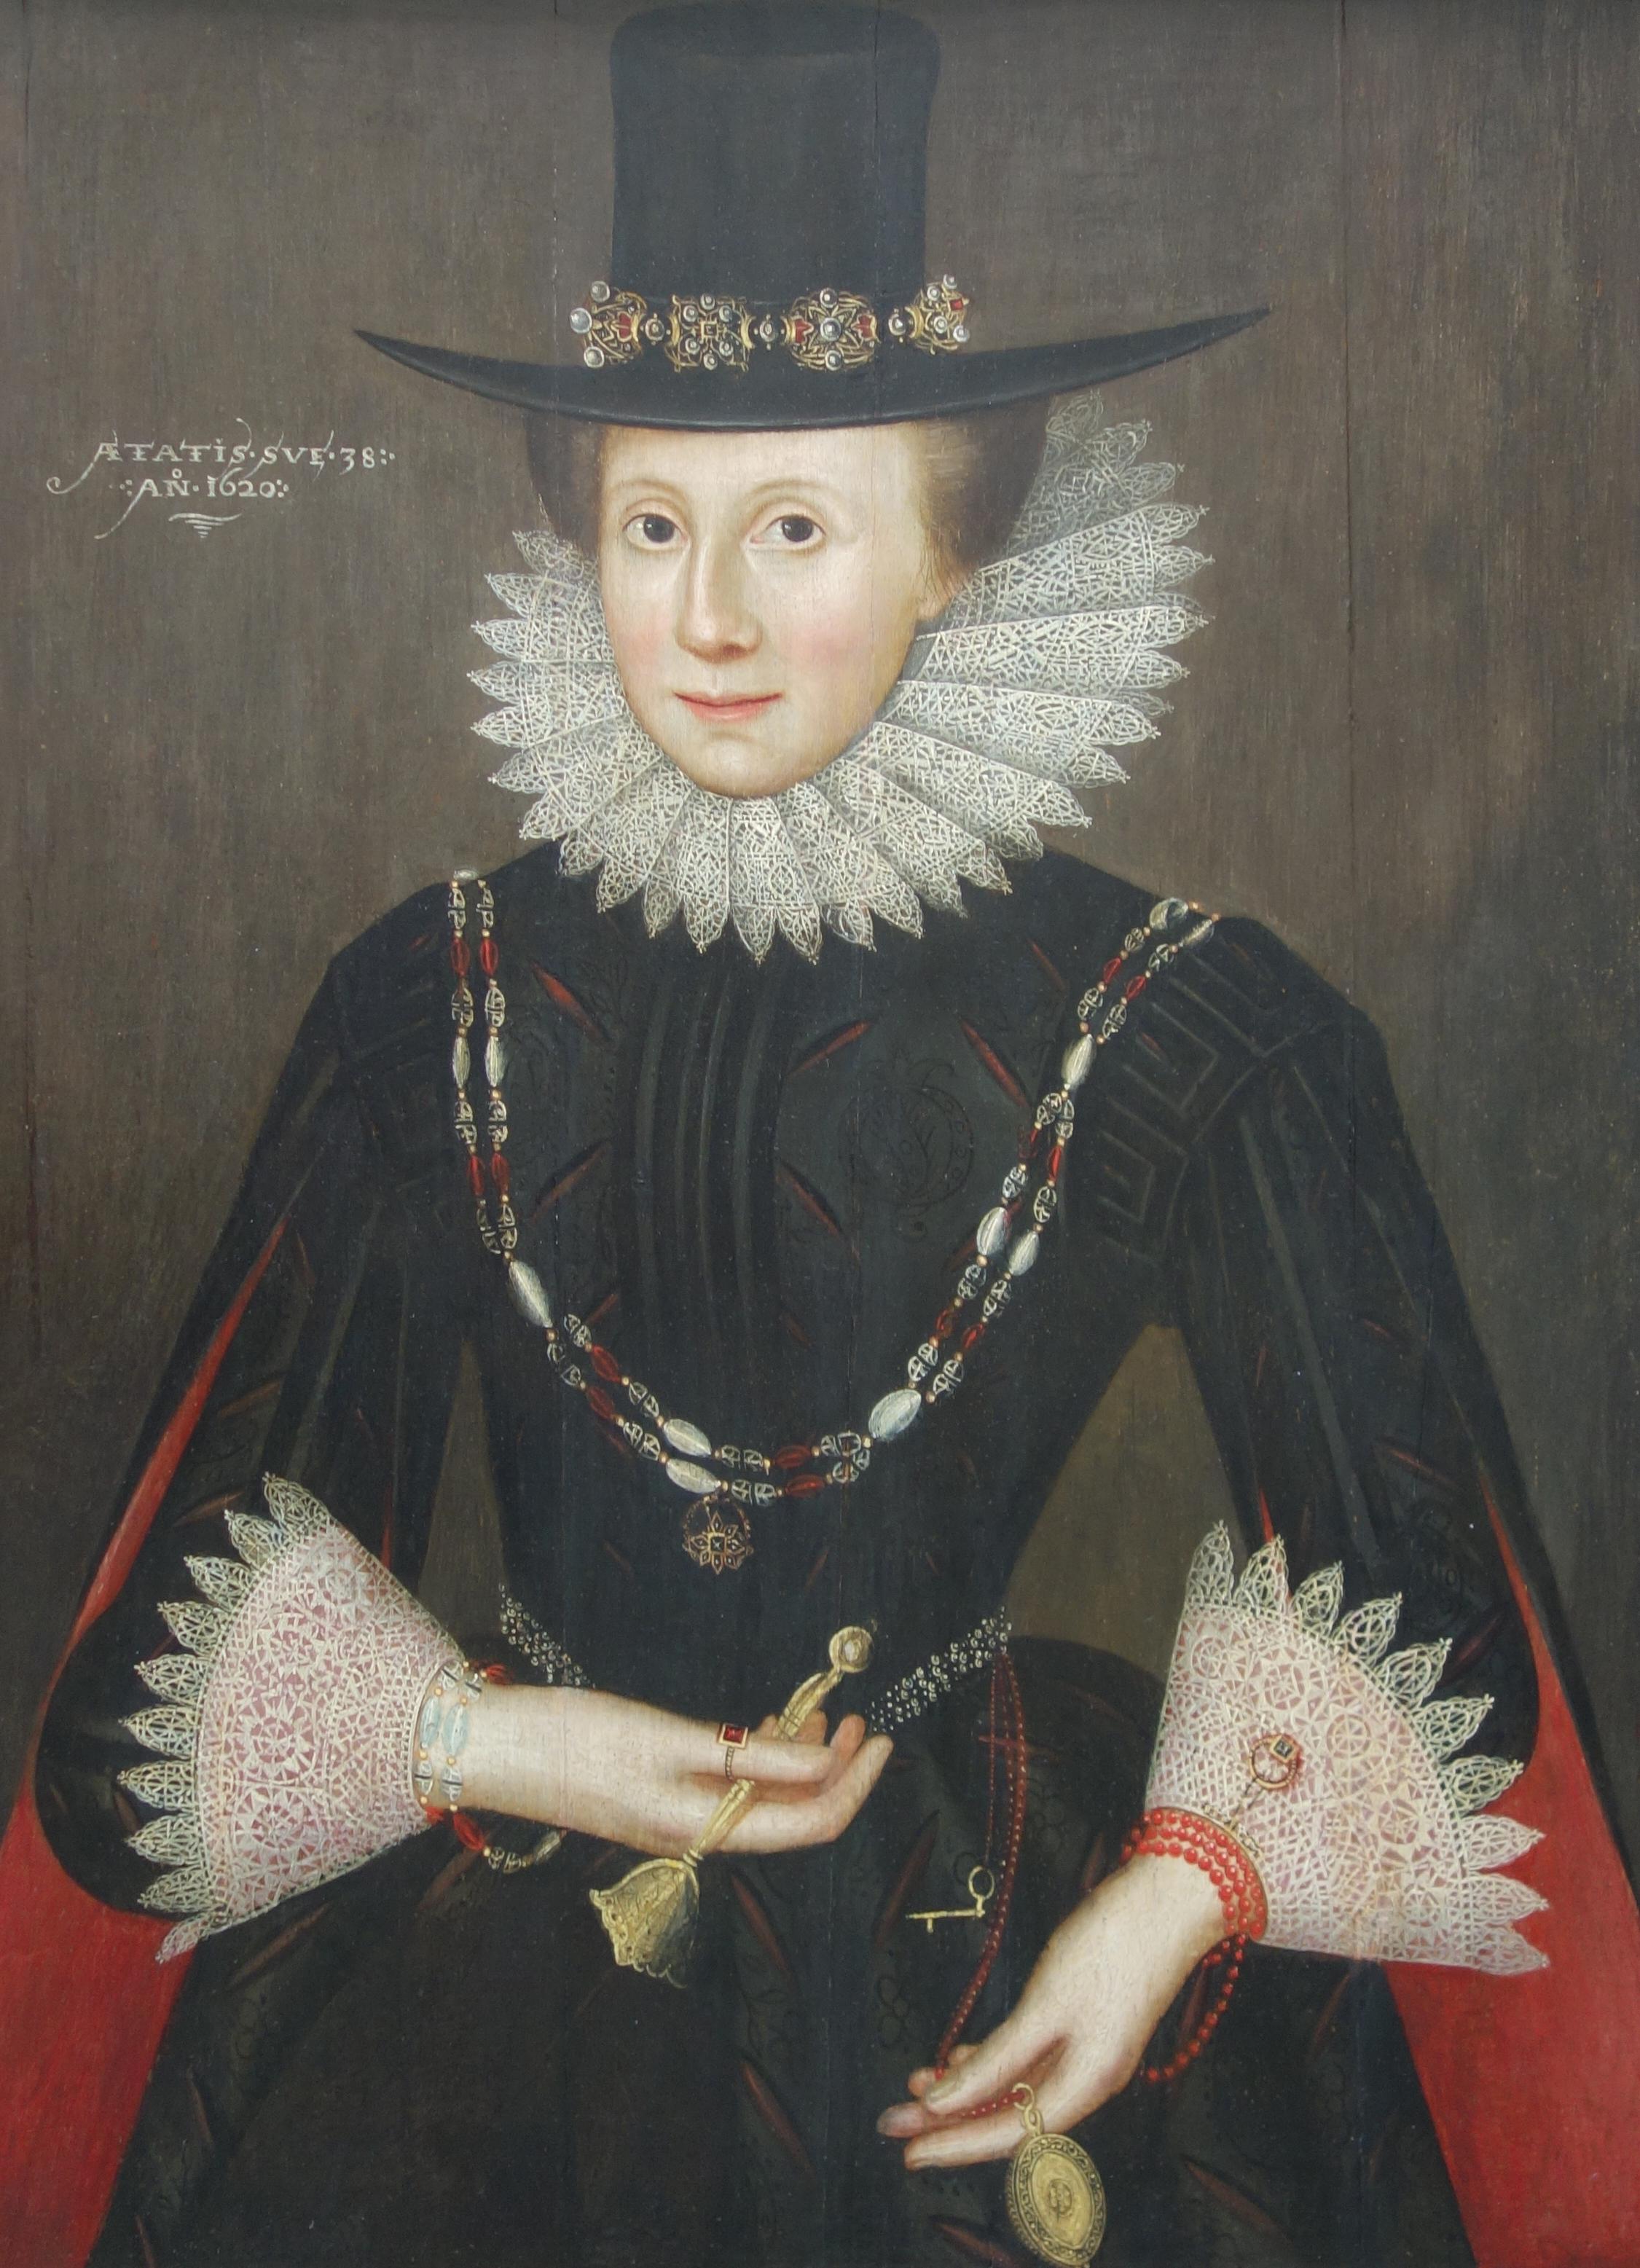 Pair of early 17th century Jacobean Portraits of Jane and William de Malbone